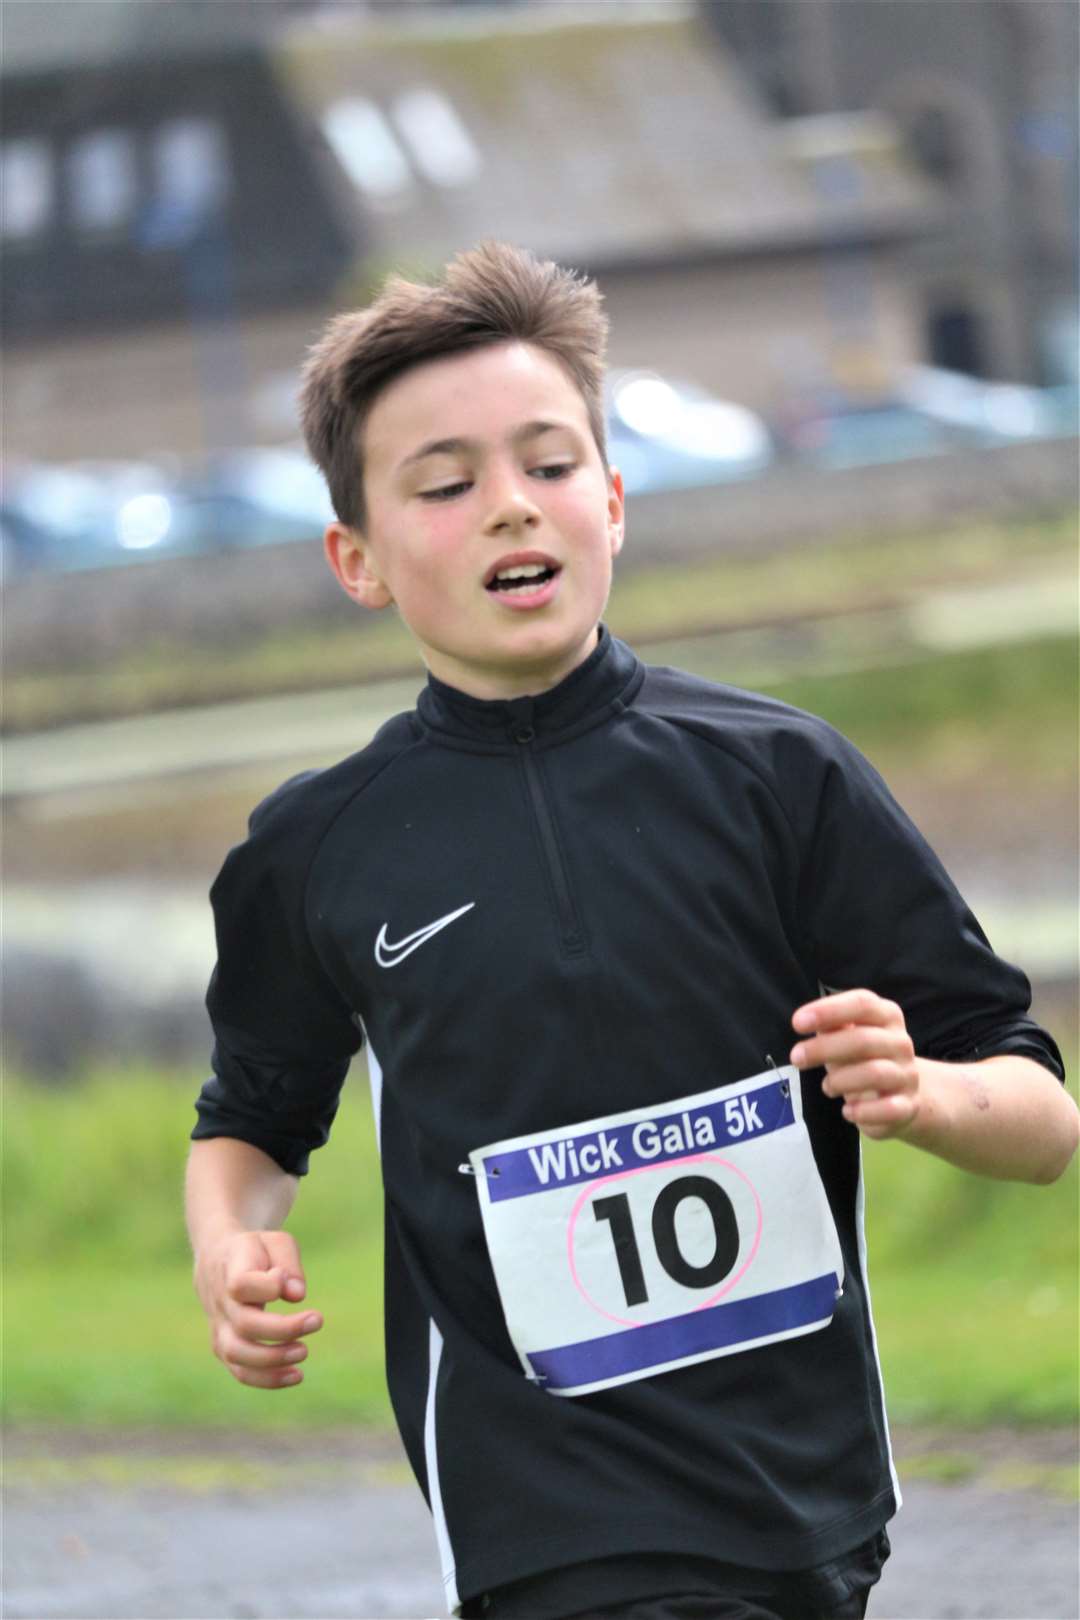 Harry McNeill competing in the 5k event. Picture: Eswyl Fell